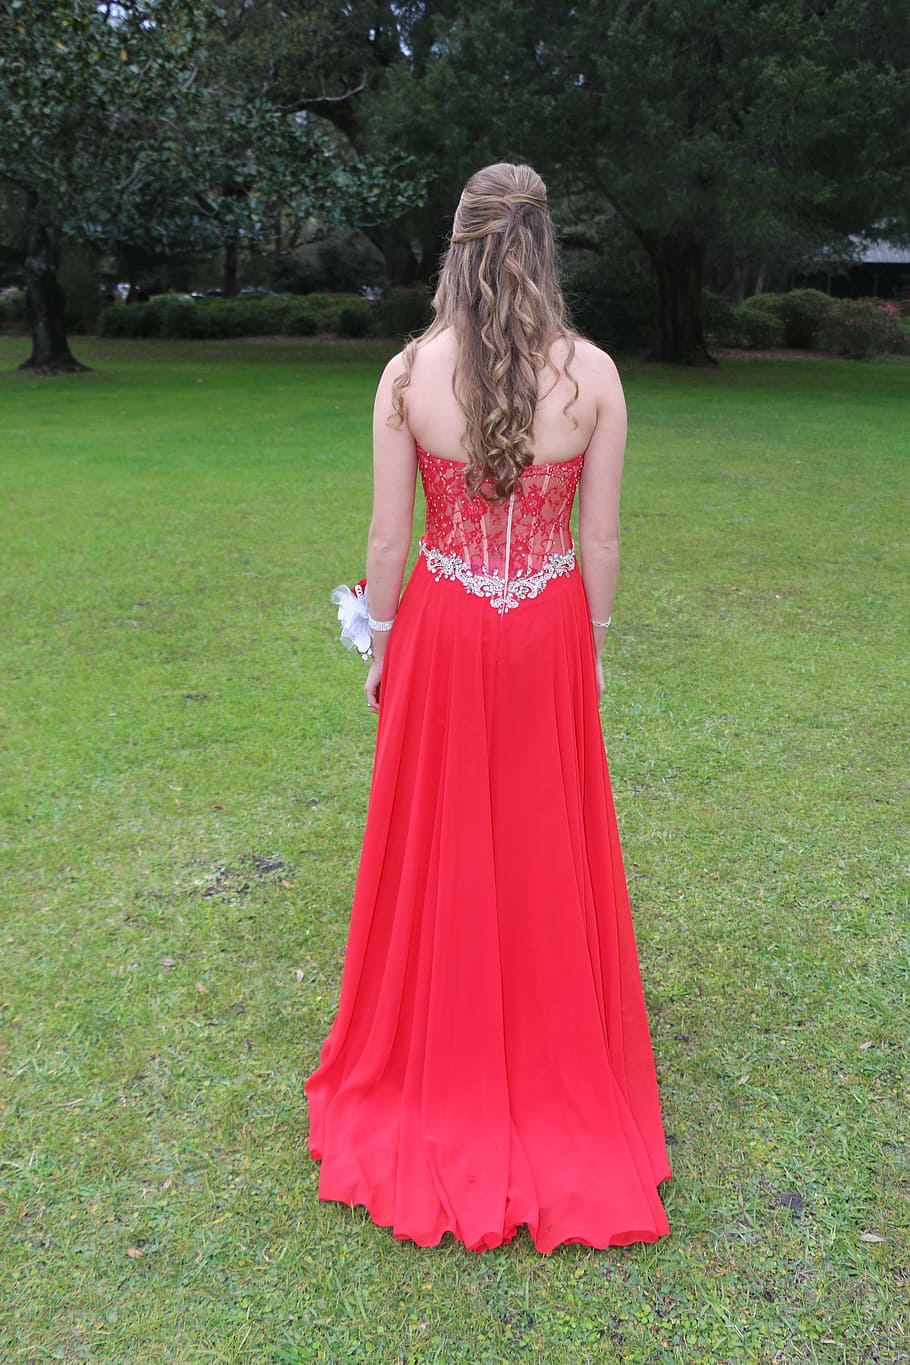 dress, prom, girl, fashion, gown, female, young, prom dress, formal, teenager